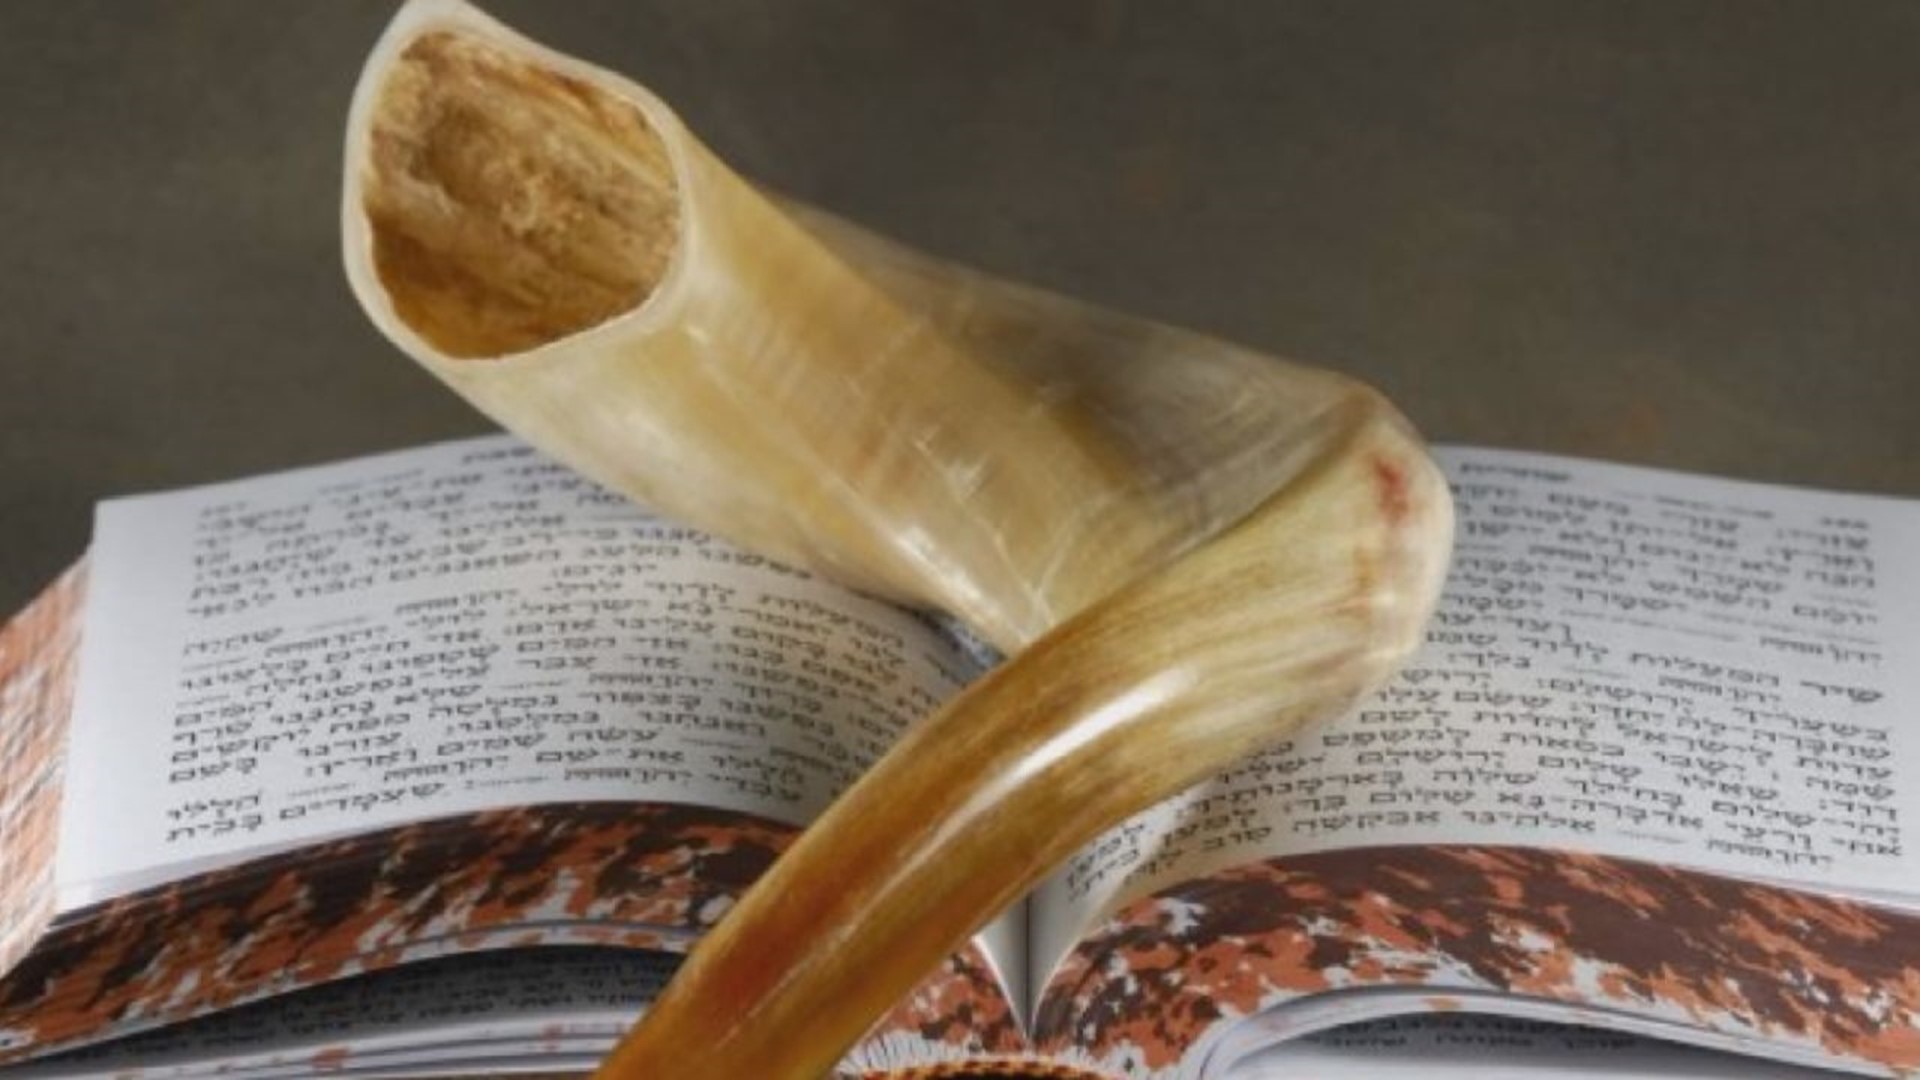 Yom Kippur, considered the Day of Atonement for members of Jewish faith, culminates the ten days of repentance at the start of the Hebrew calendar.